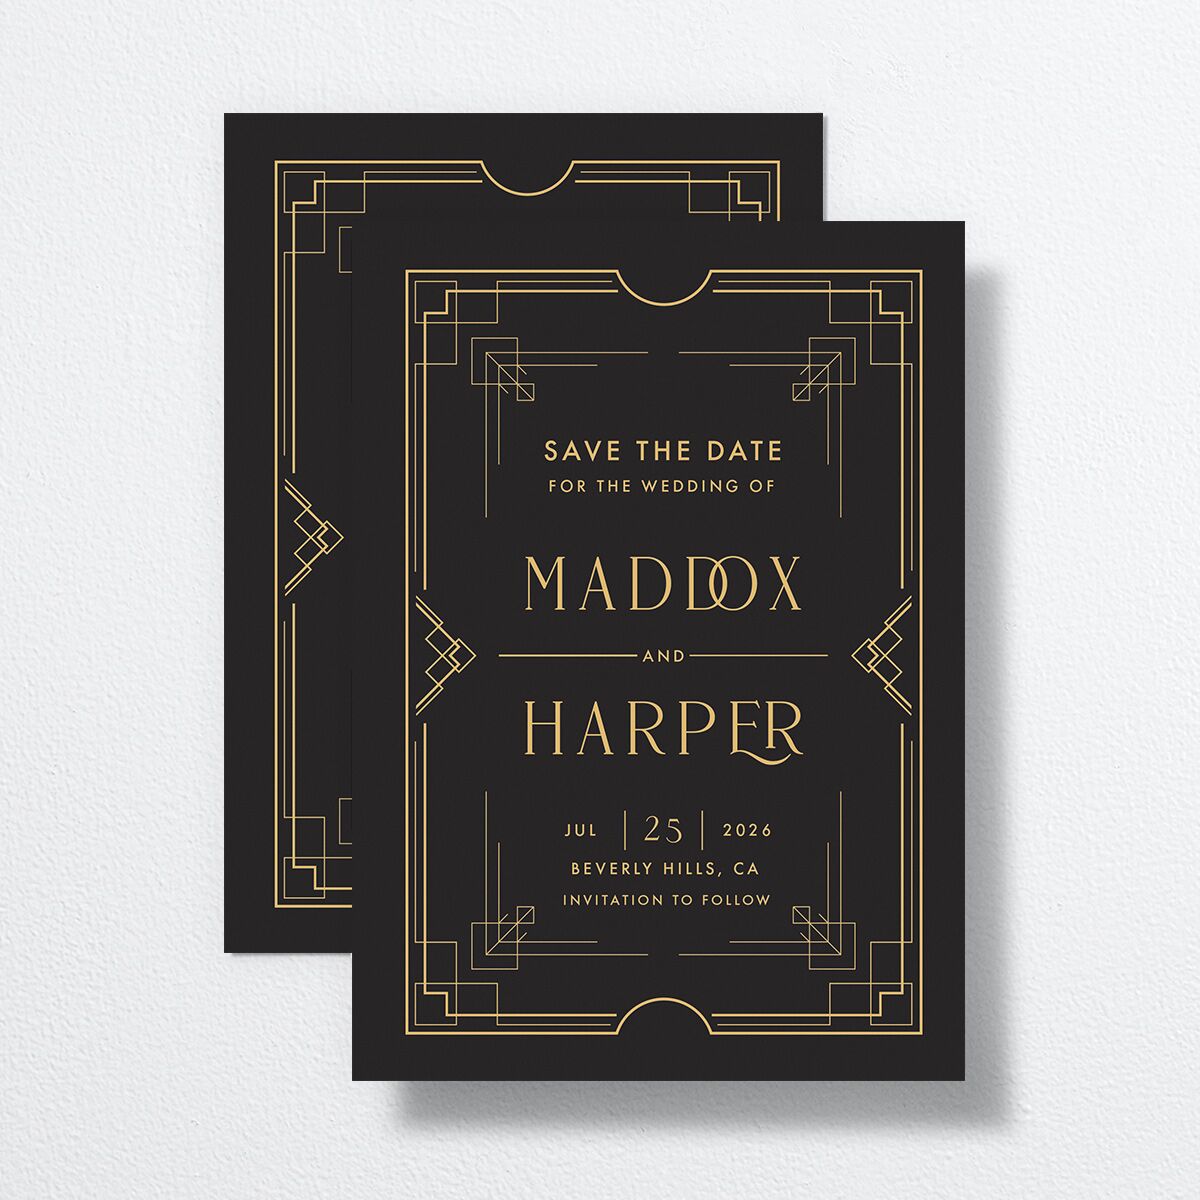 Vintage Hollywood Save The Date Cards front-and-back